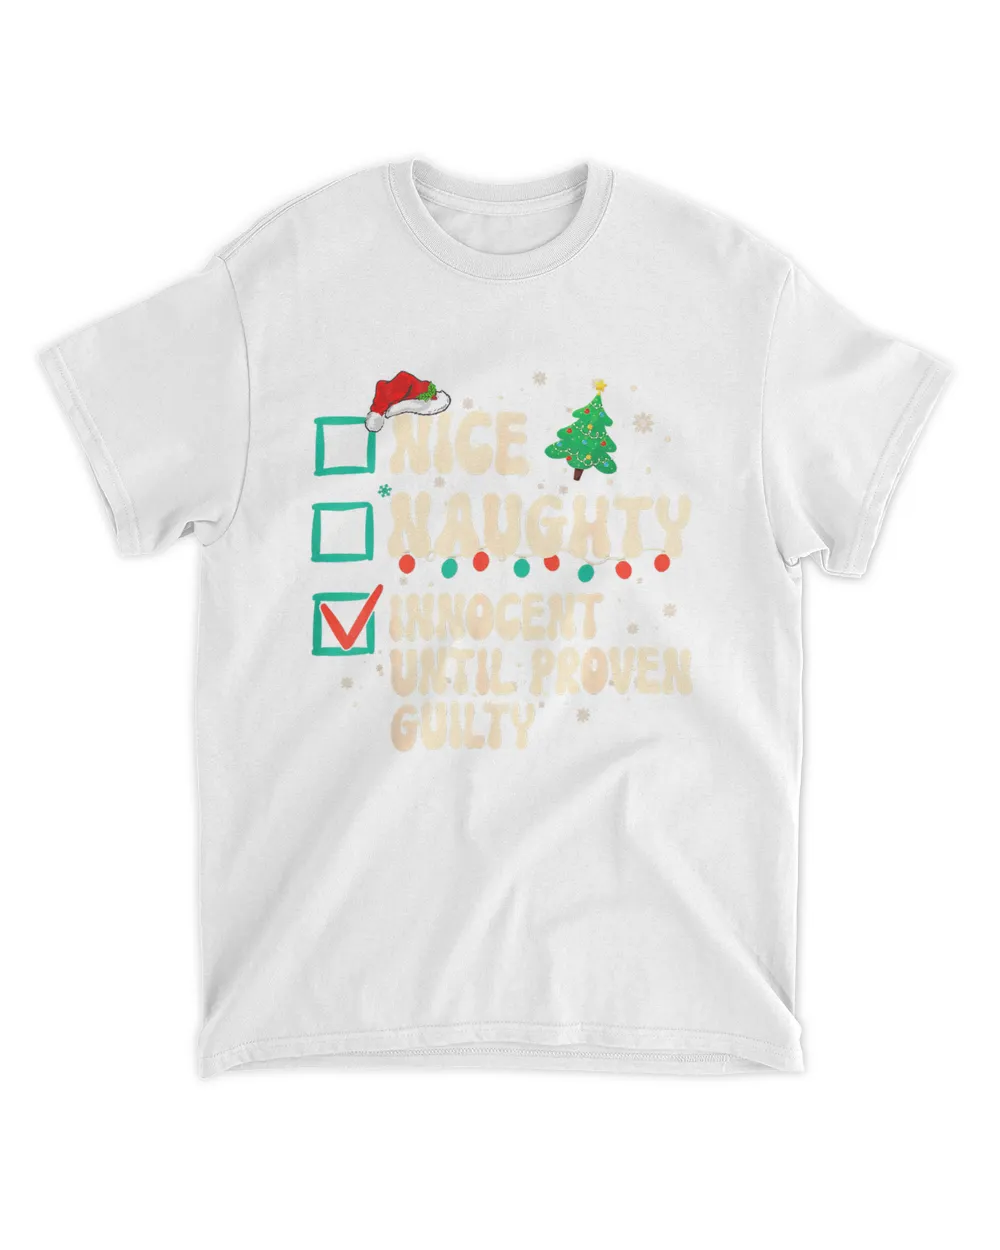 Nice Naughty Innocent Until Proven Guilty Xmas List Funny T-Shirt